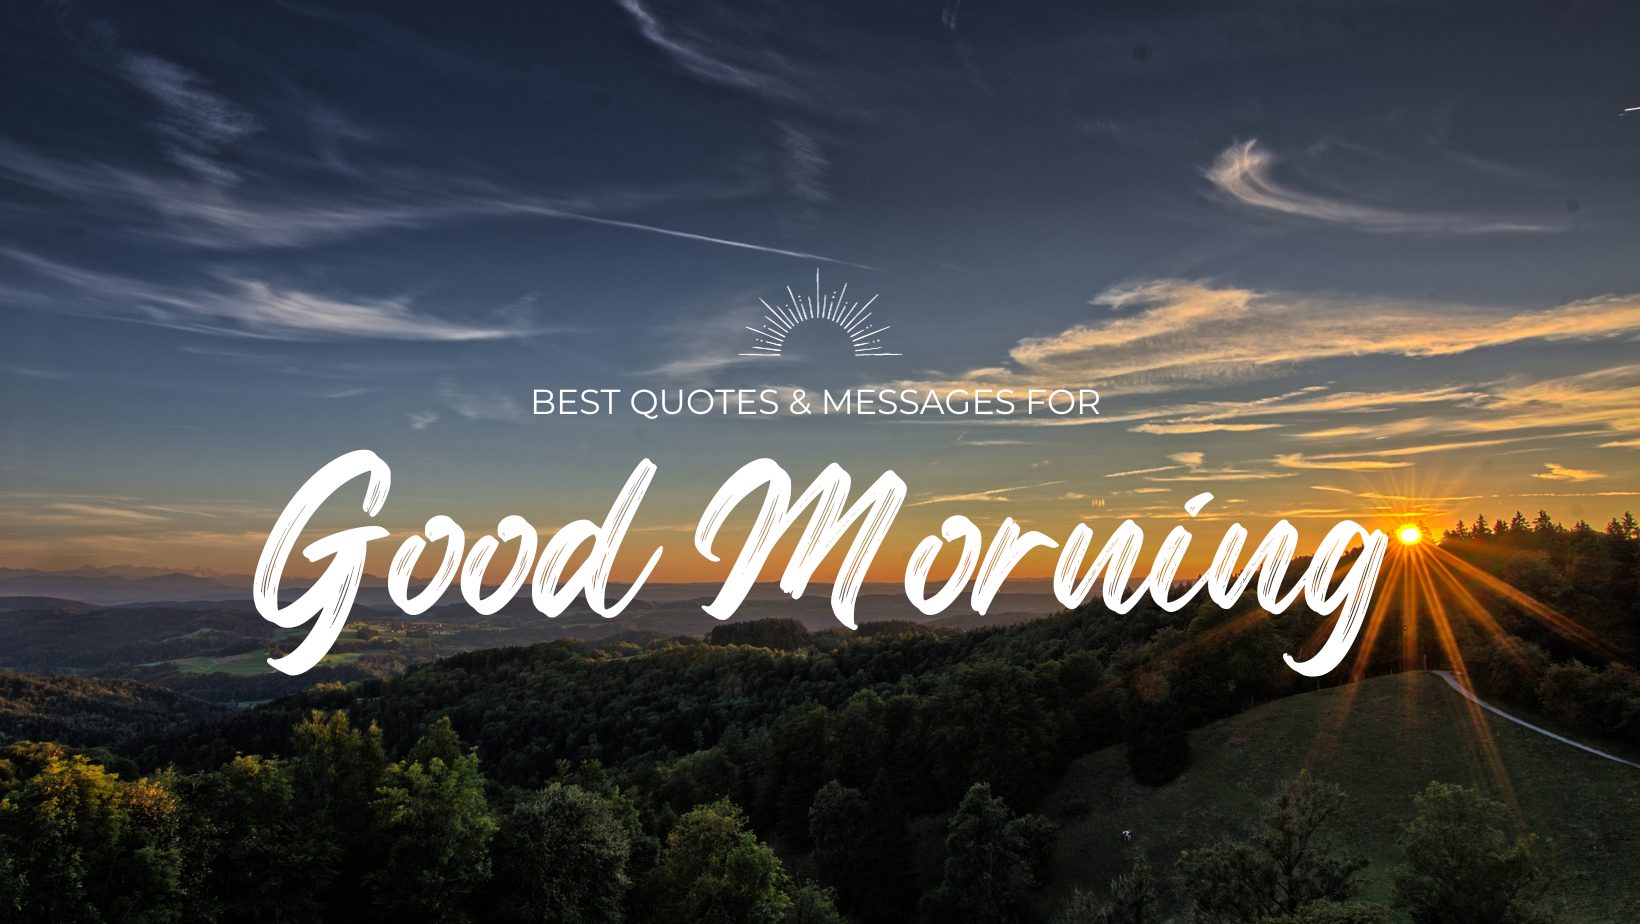 Best Good Morning Messages and Quotes to Kick Start Your Healthy Day